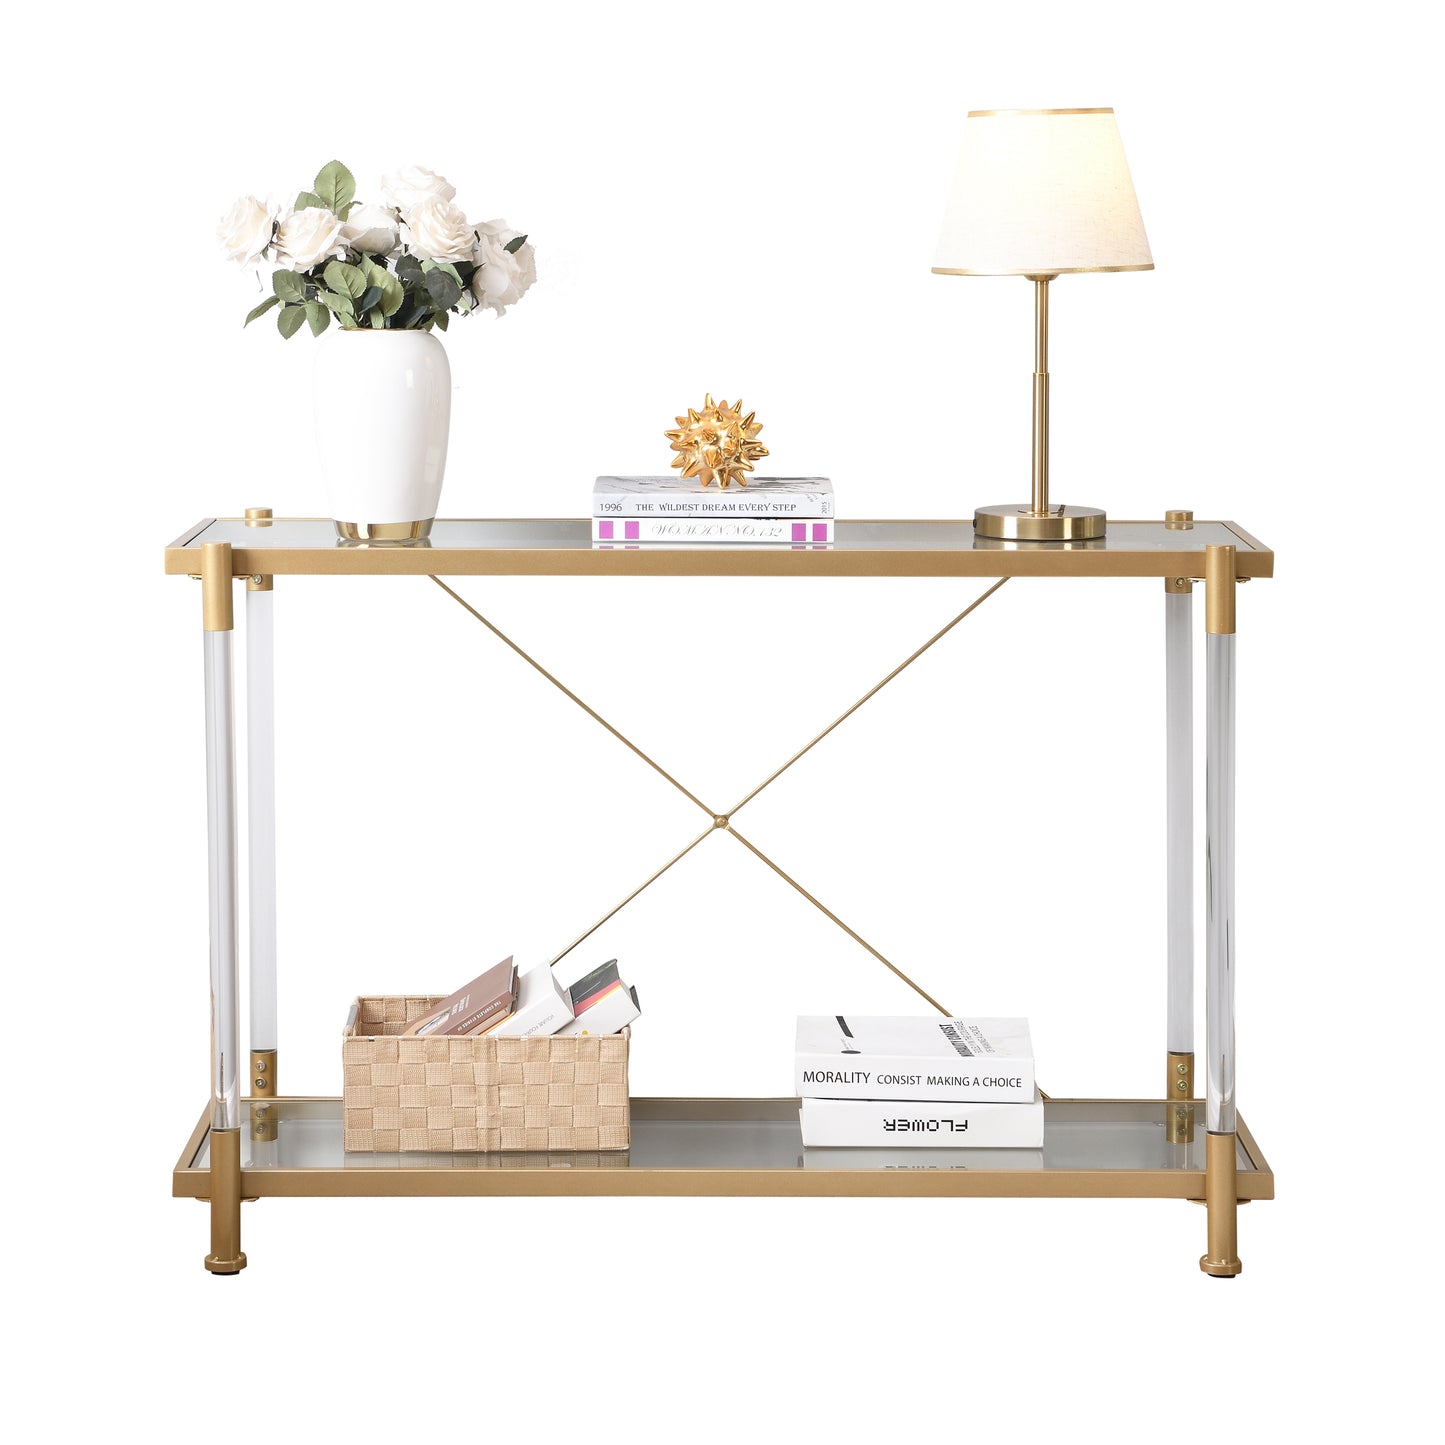 Acrylic Glass Side Table, Golden Sofa Table, Console Table for Living Room& Bedroom